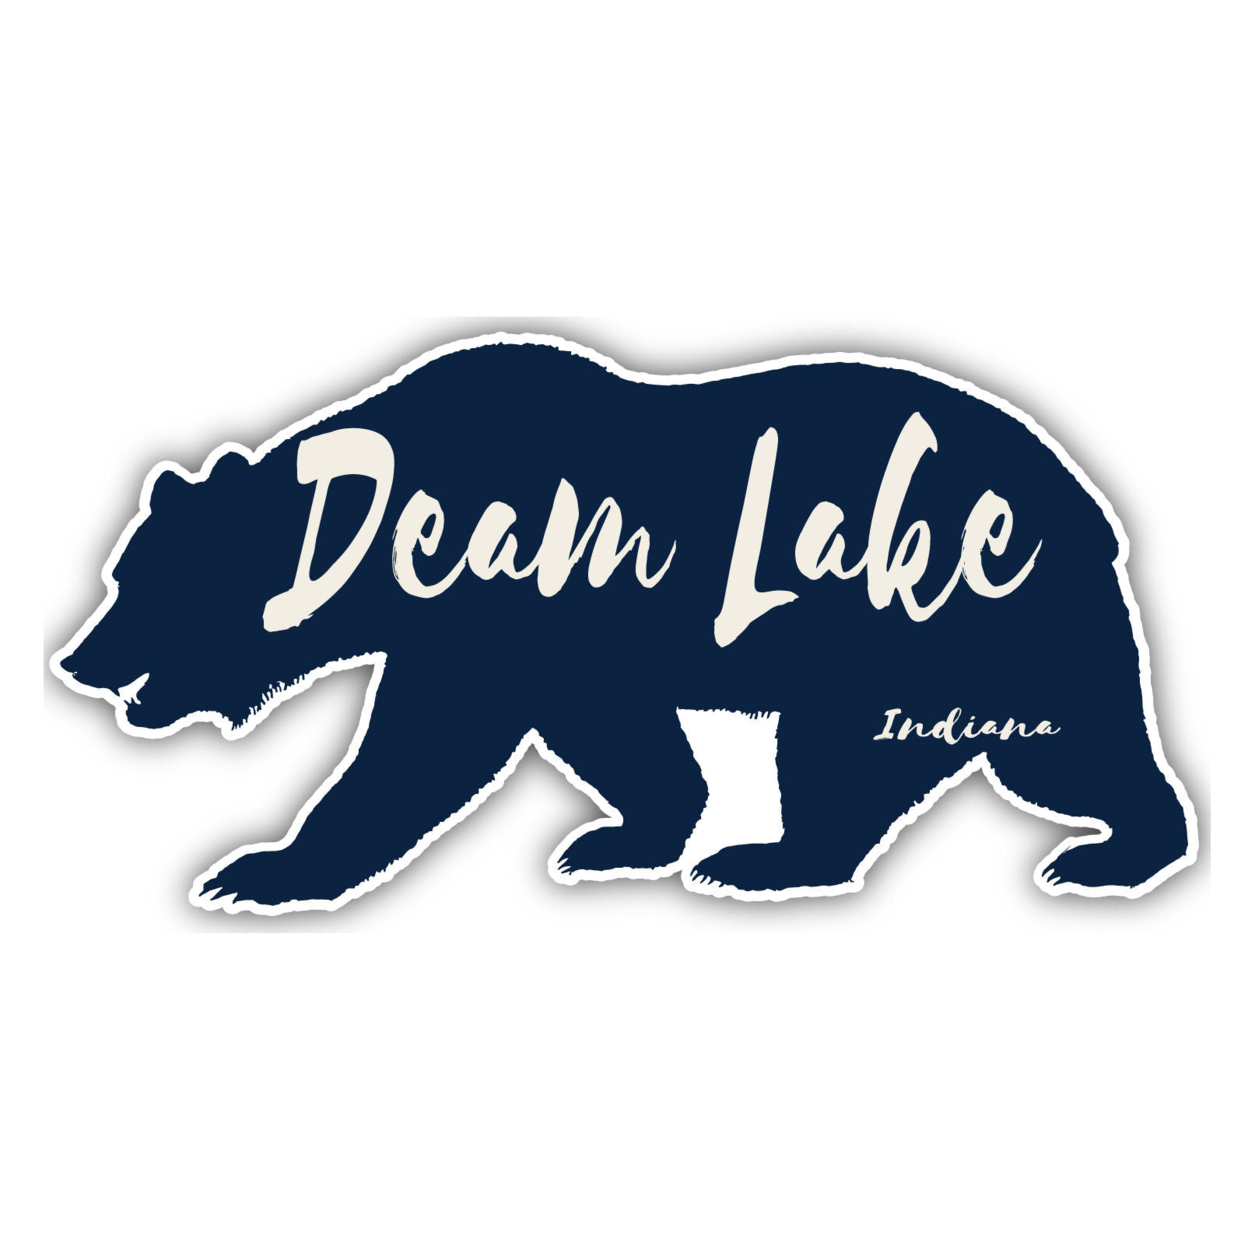 Deam Lake Indiana Souvenir Decorative Stickers (Choose Theme And Size) - 4-Pack, 2-Inch, Great Outdoors